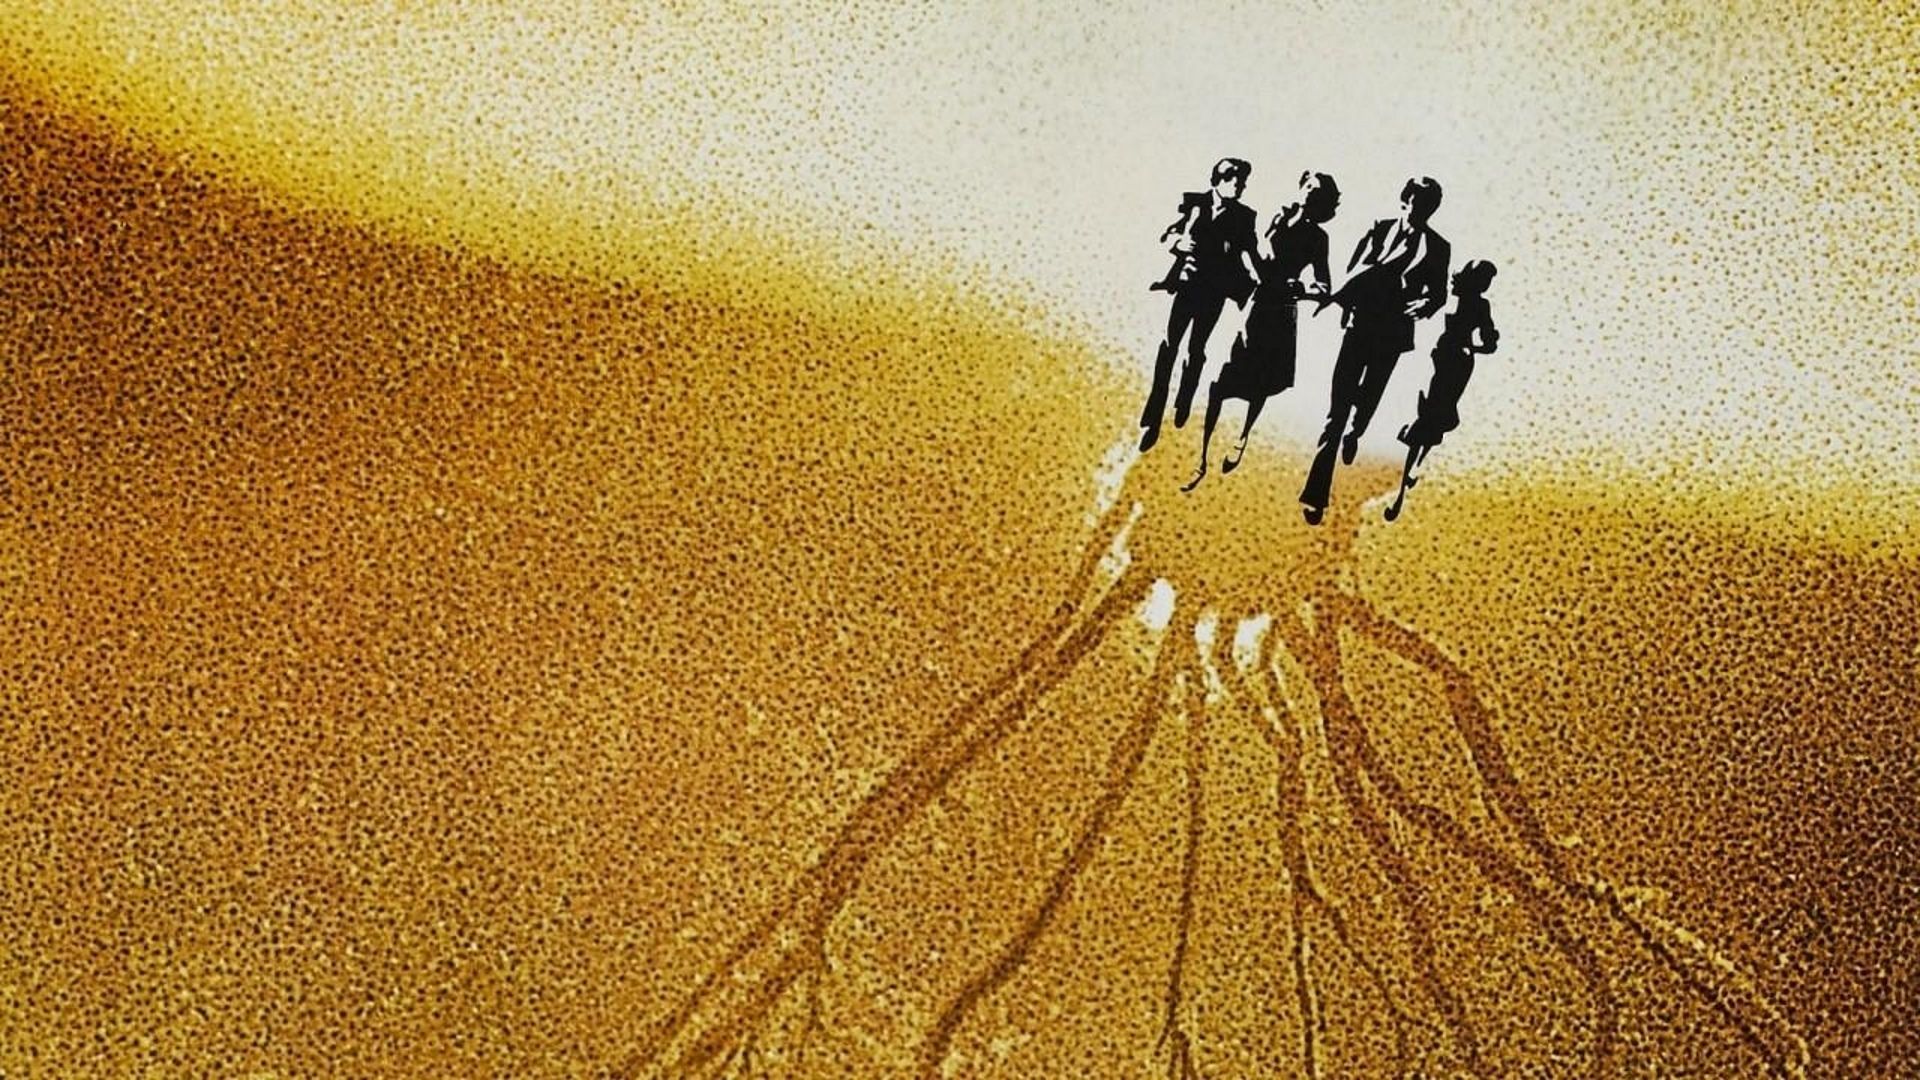 Invasion of the Body Snatchers background